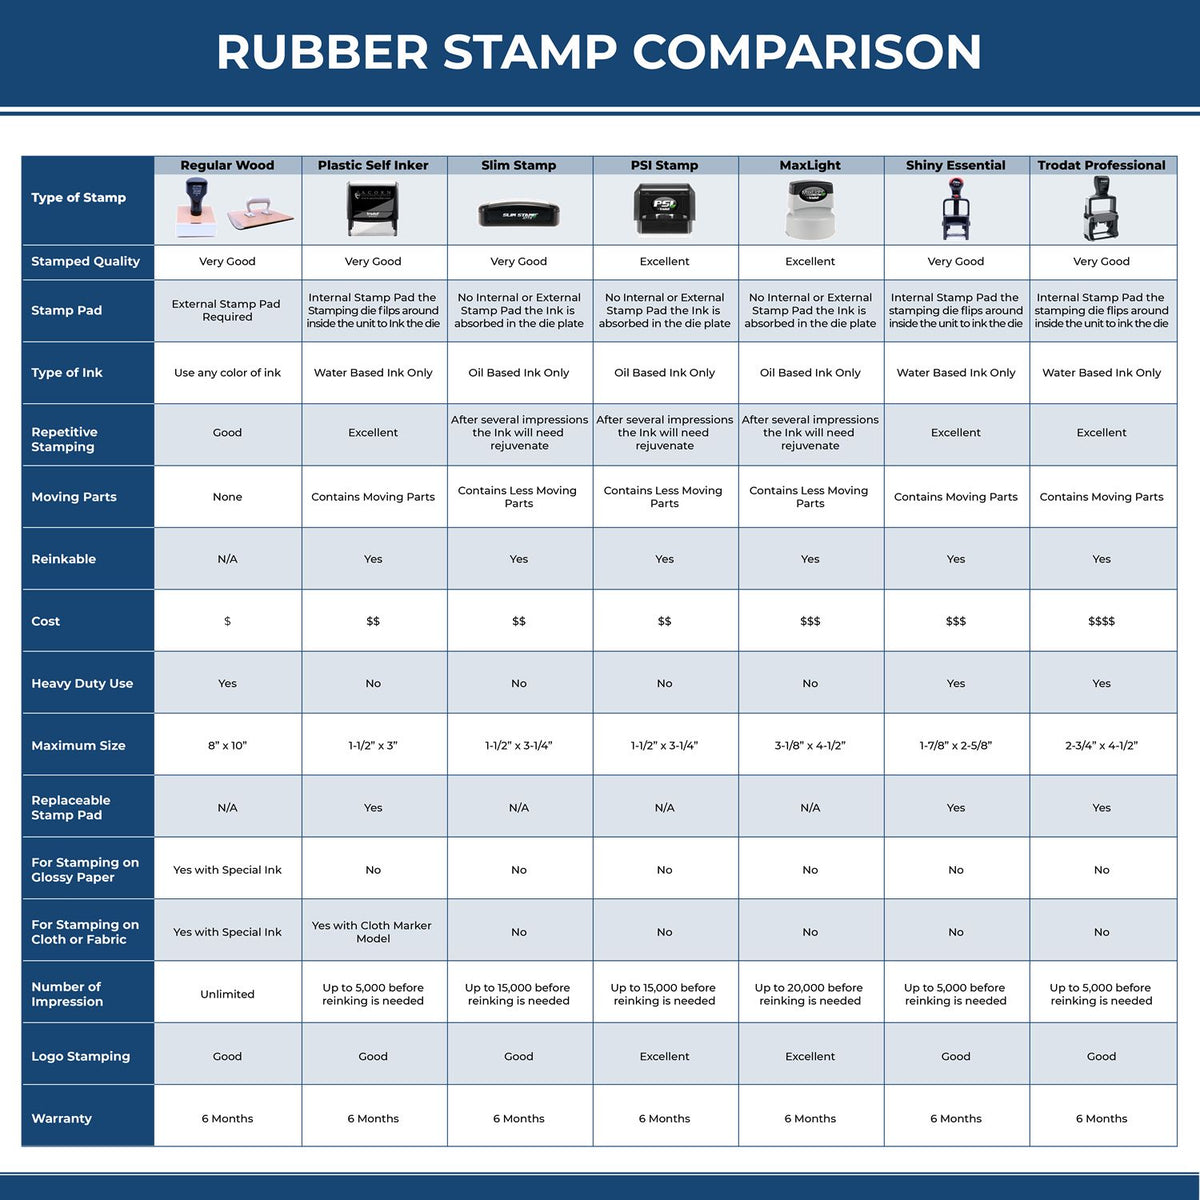 Large Self Inking Dnr Stamp 4545S Rubber Stamp Comparison